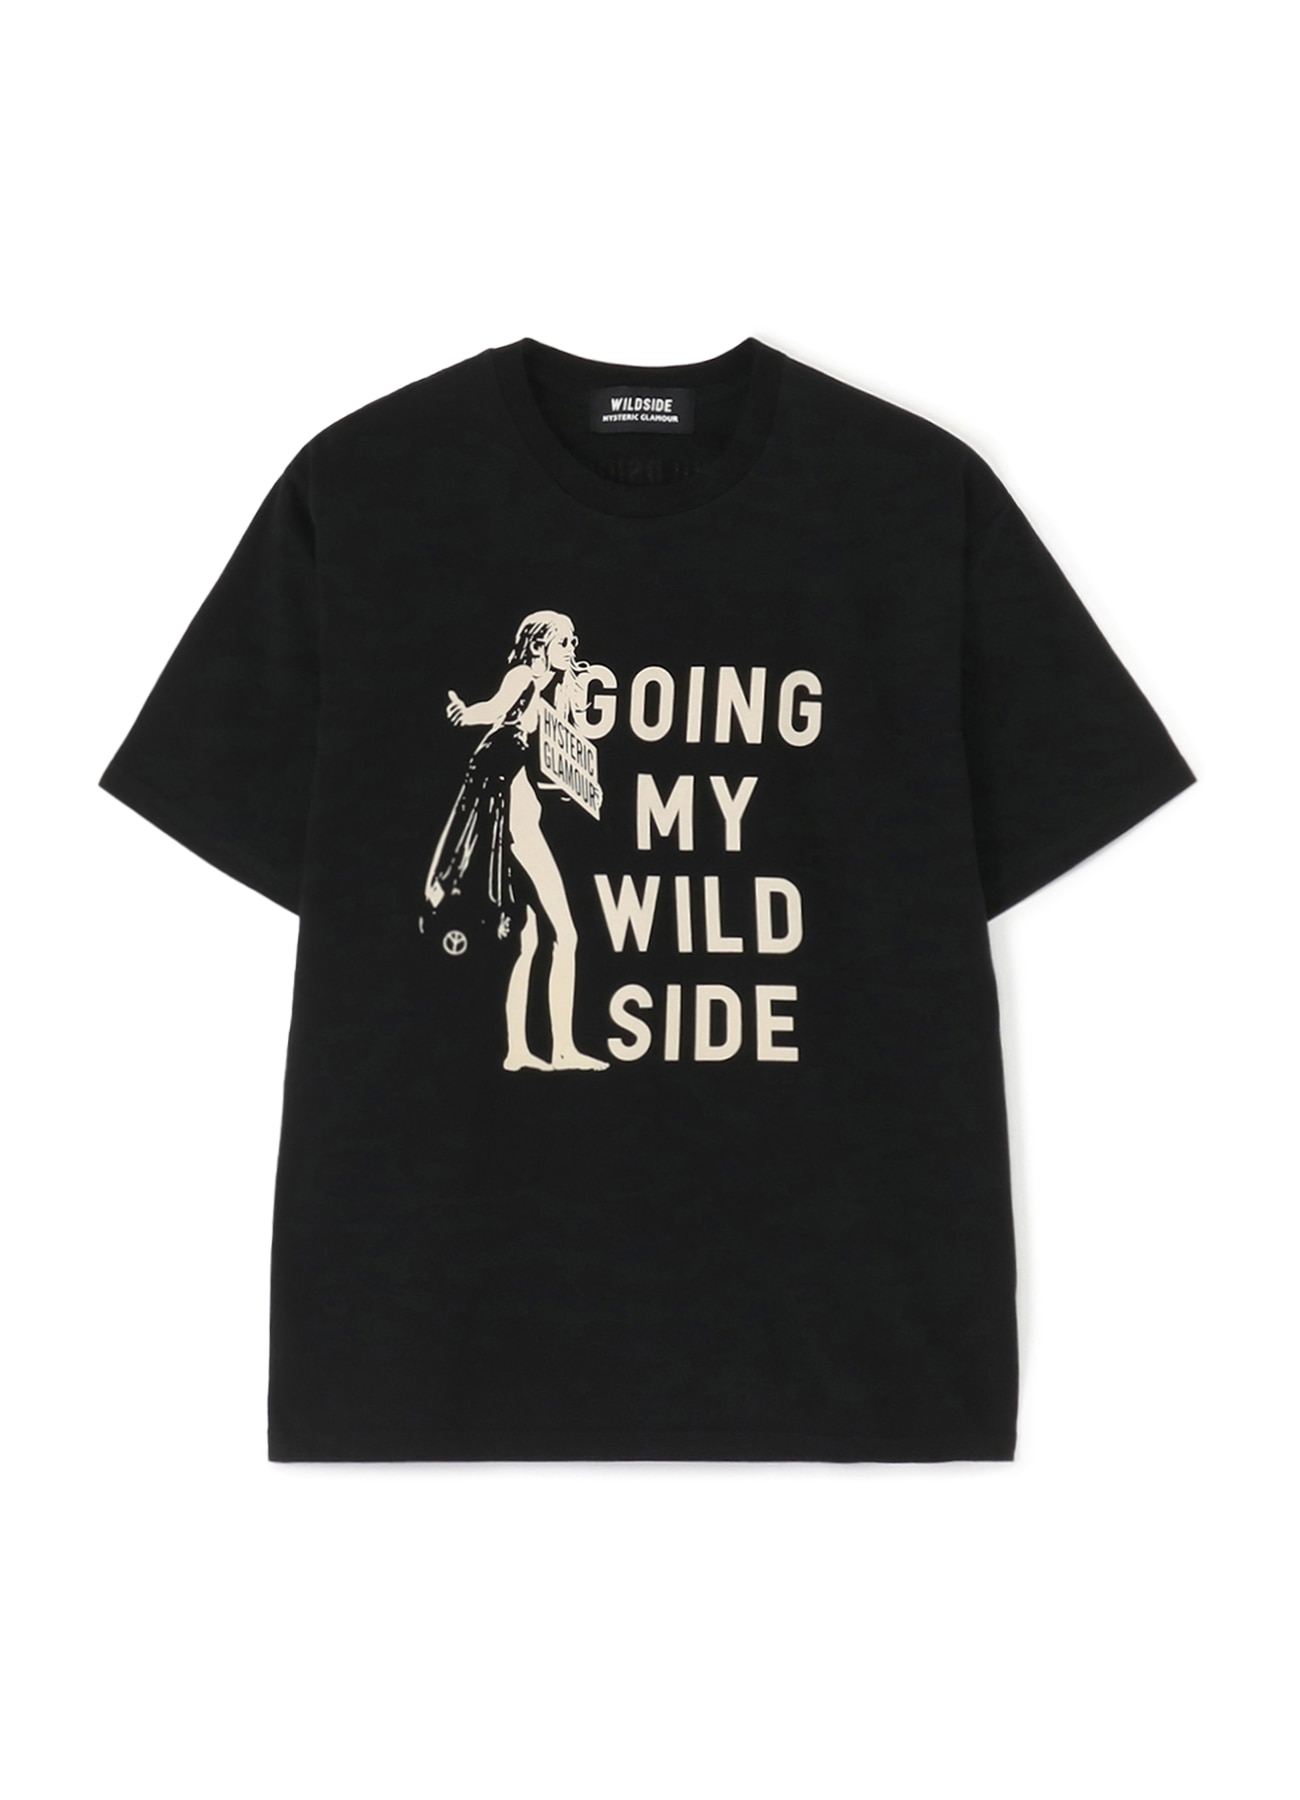 WILDSIDE x HYSTERIC GLAMOUR "GOING MY WILDSIDE" T-shirt